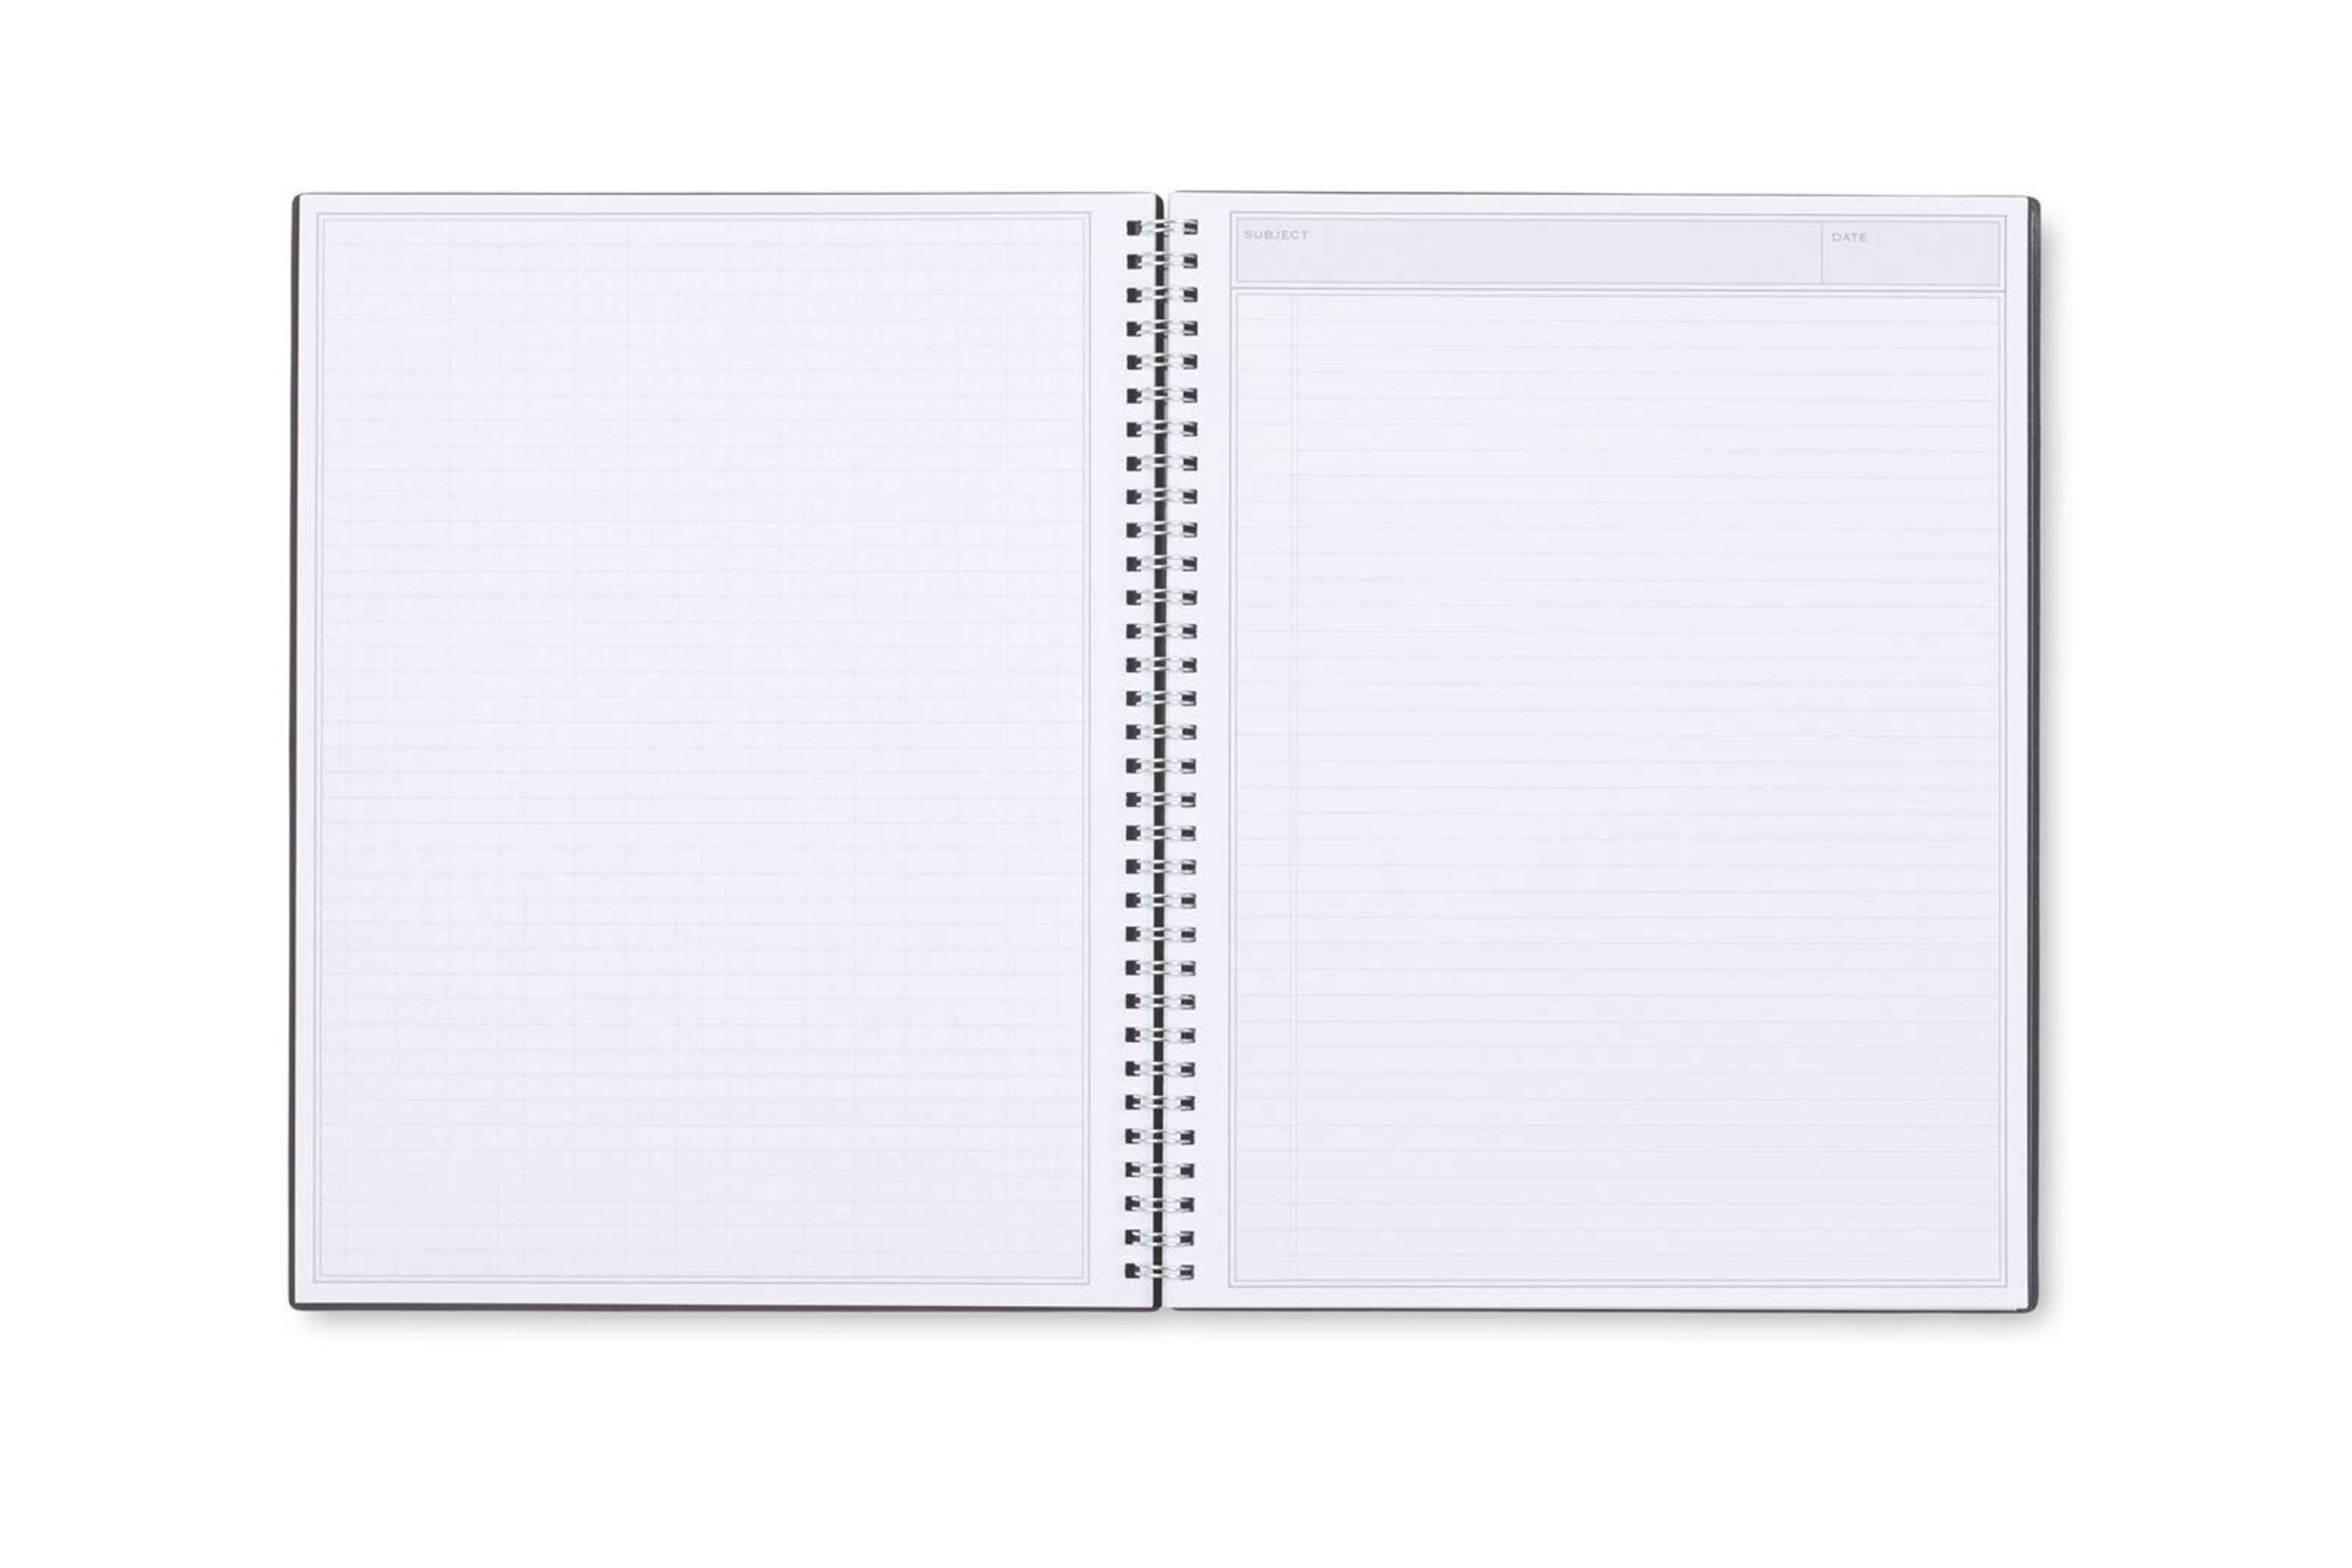 Blue Sky Notes Professional Notebook, Flexible Cover, Twin-Wire Binding, 8.5 x